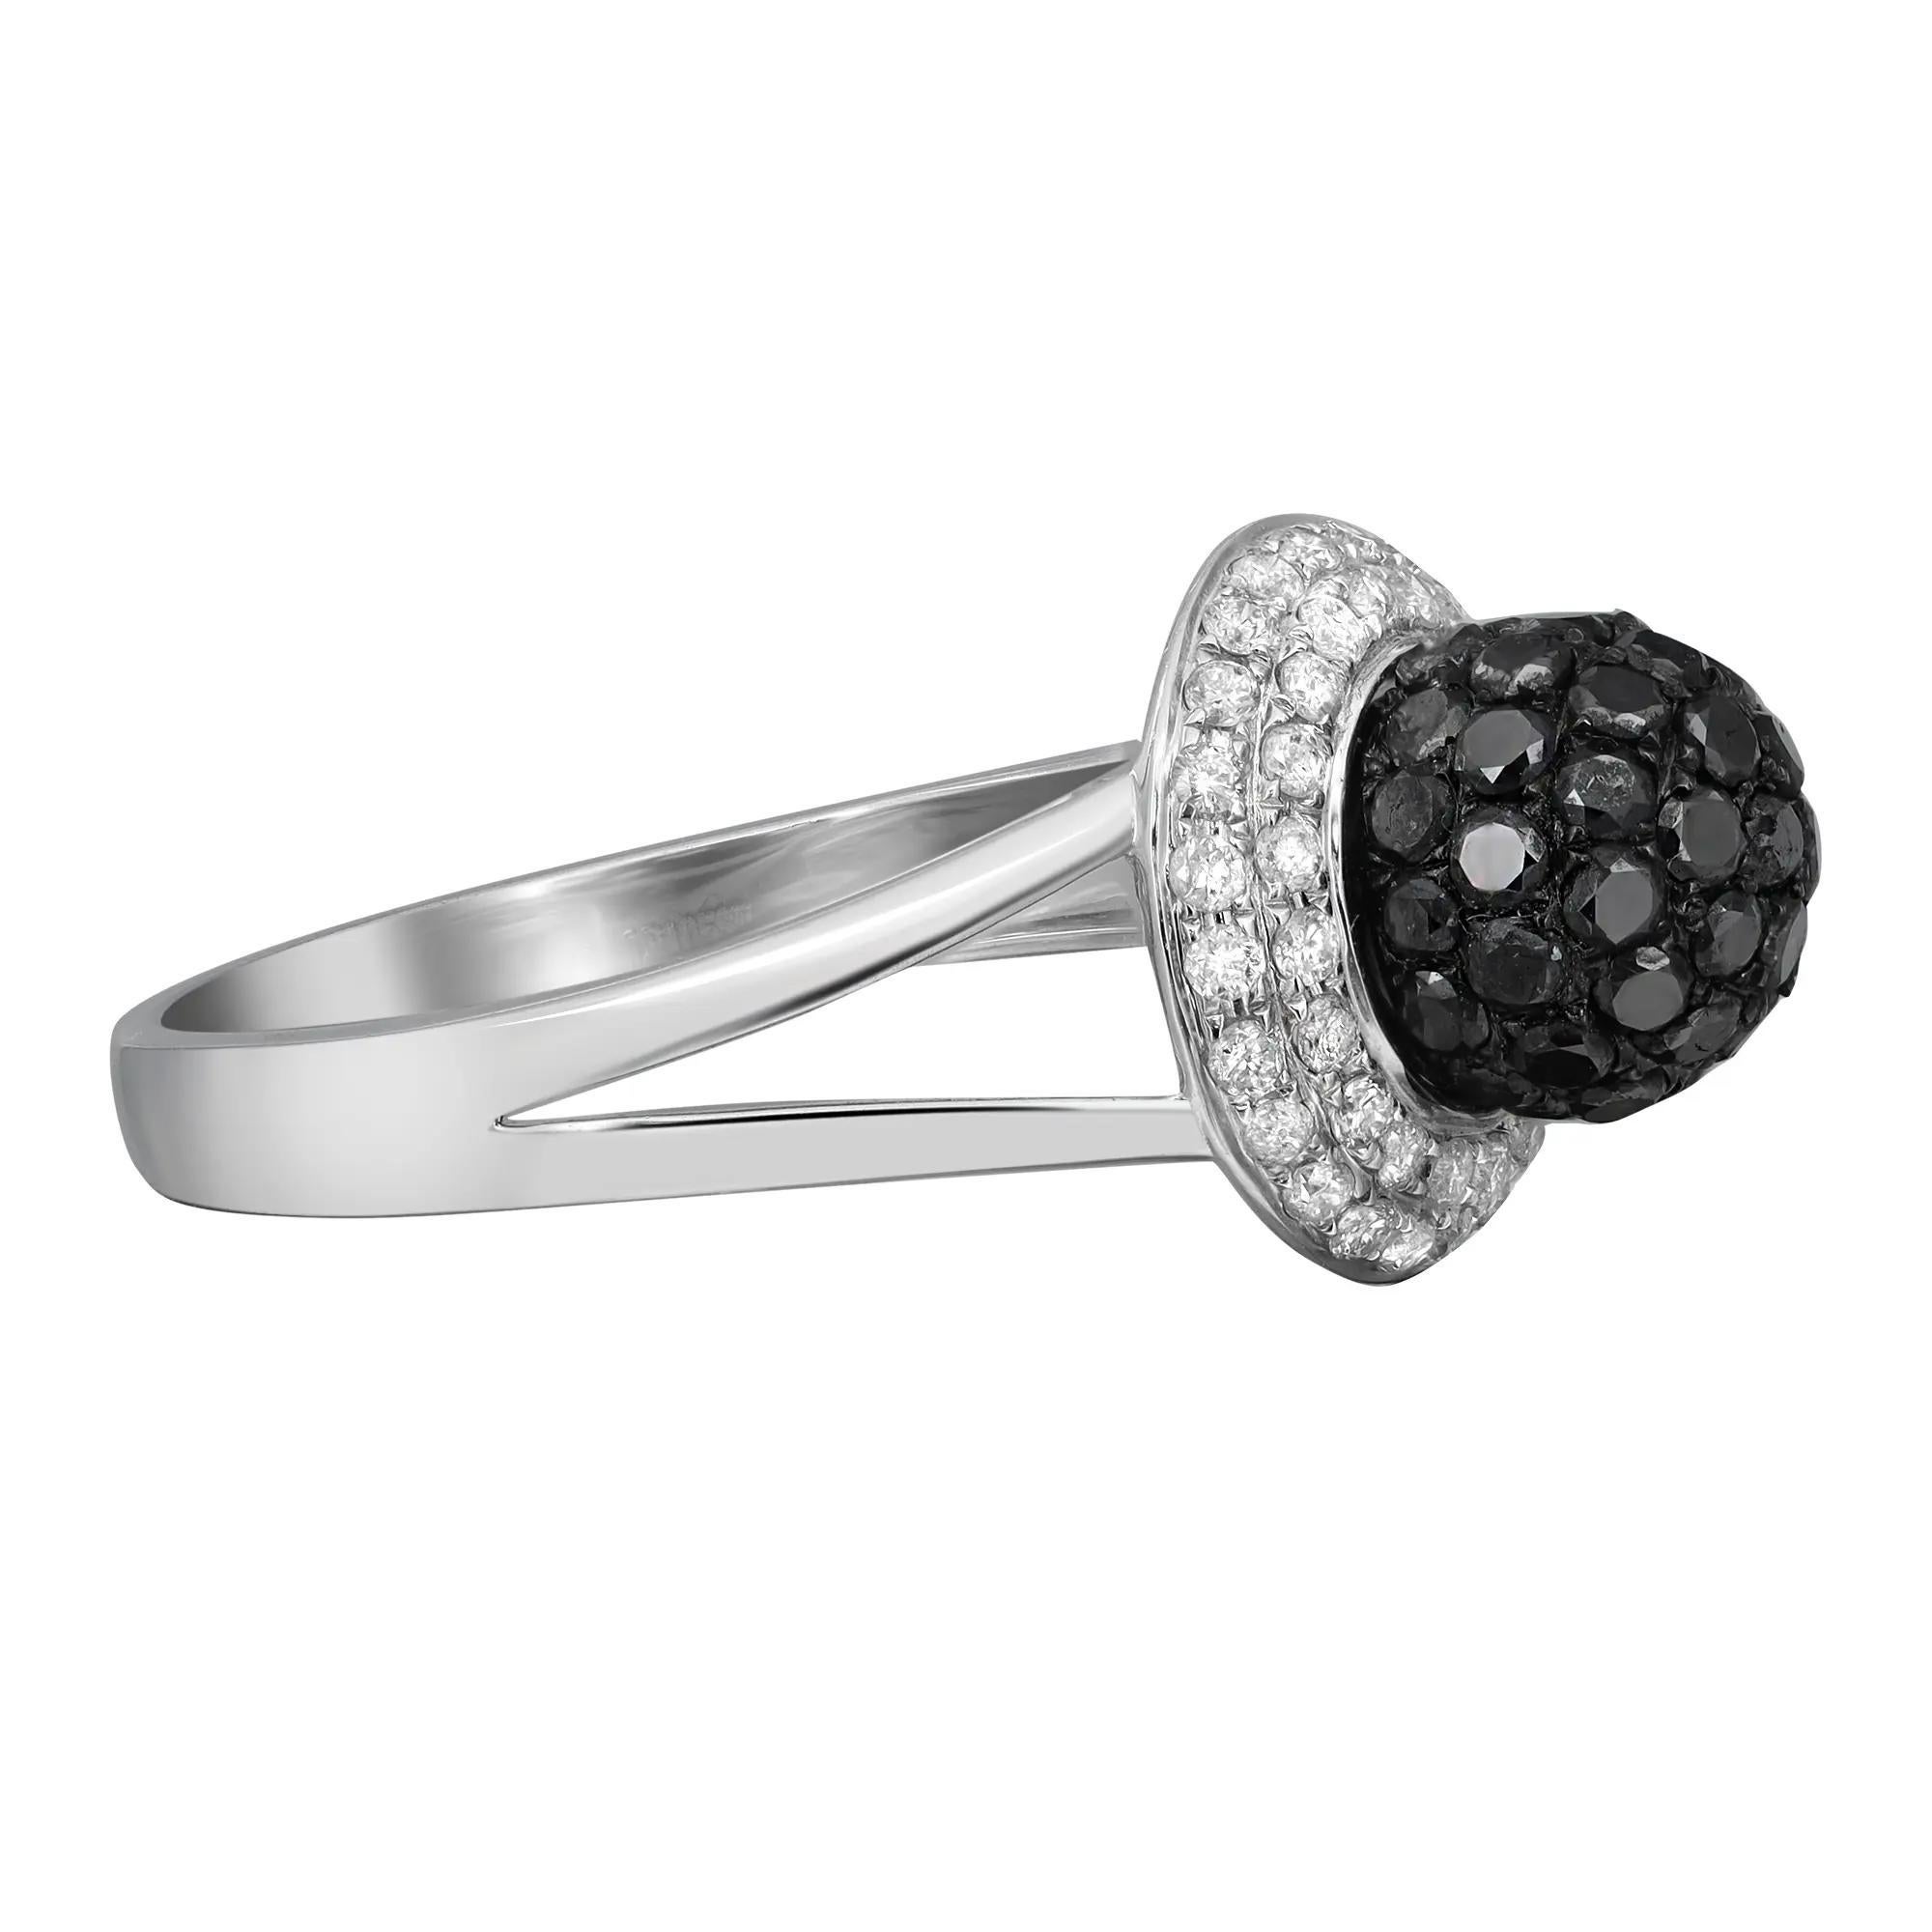 This beautiful diamond cocktail ring is crafted in fine 14k white gold. An excellent pave set of black round brilliant cut diamonds are flanked as a center round ball surrounded with white round cut diamonds. Total diamond weight: 1.25 carats.